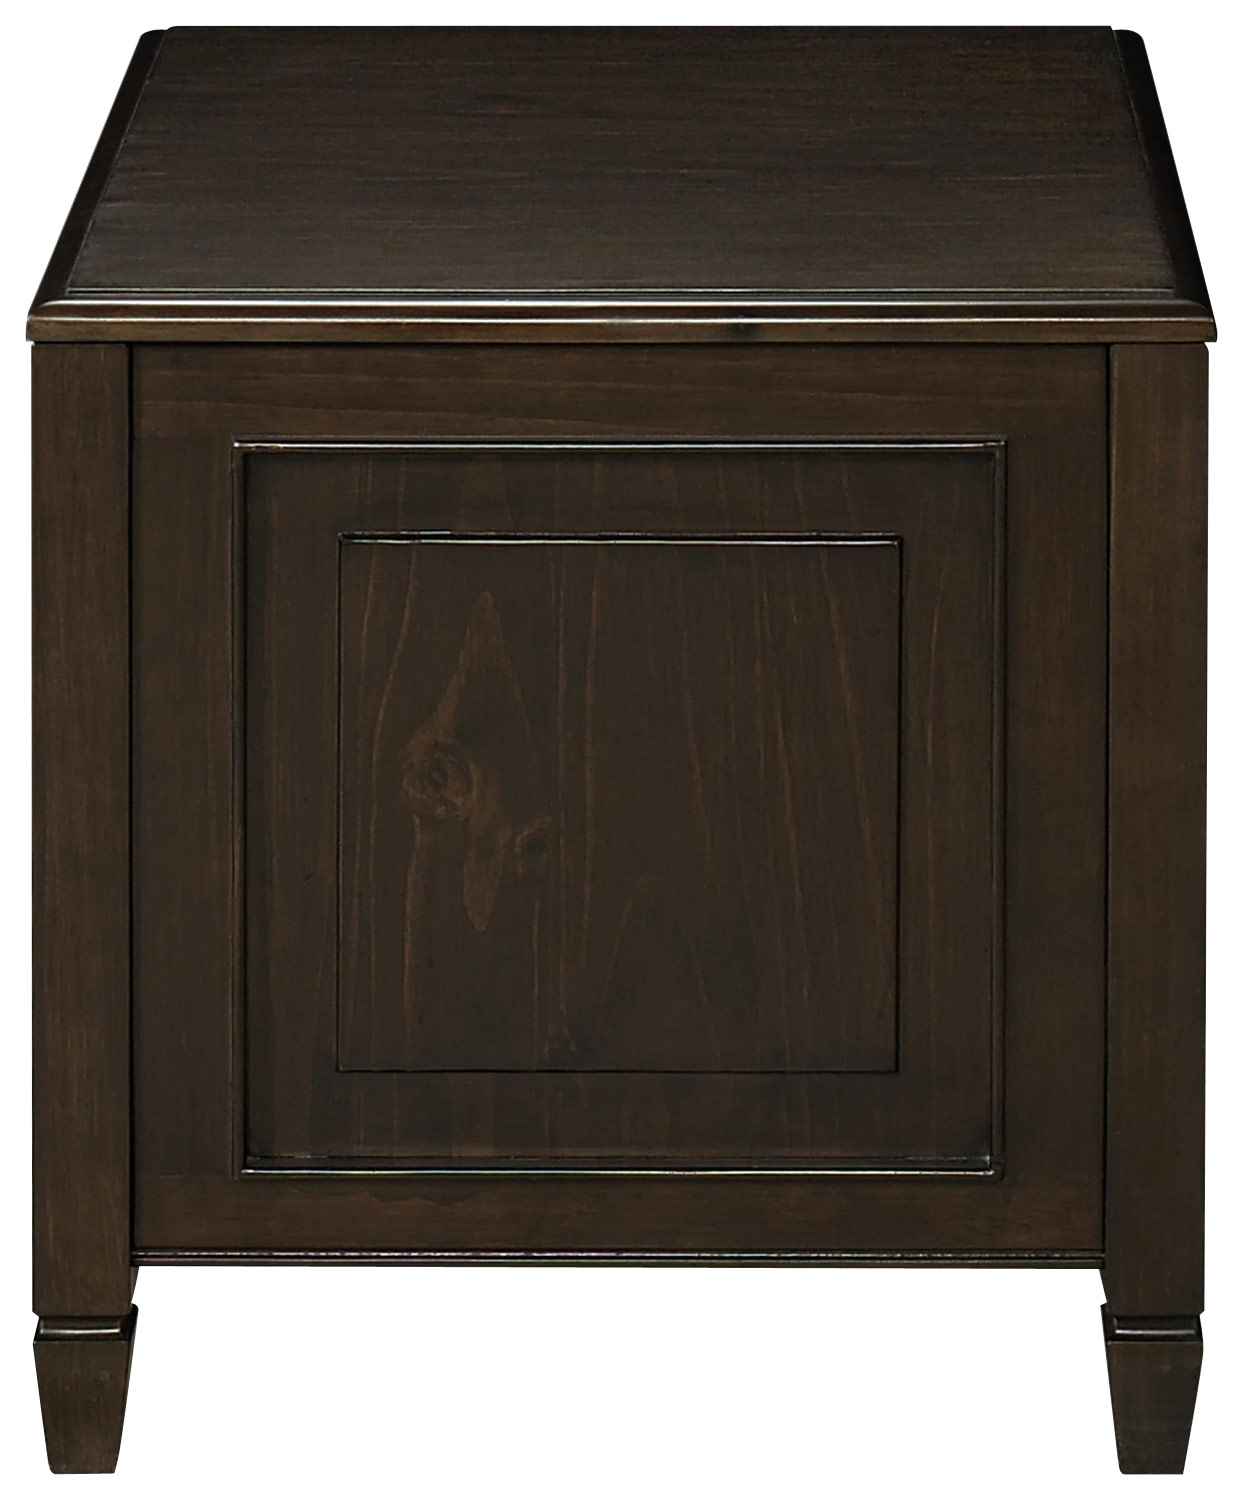 Simpli Home - Connaught End Side Table with Tray - Dark Chestnut Brown was $244.99 now $175.99 (28.0% off)